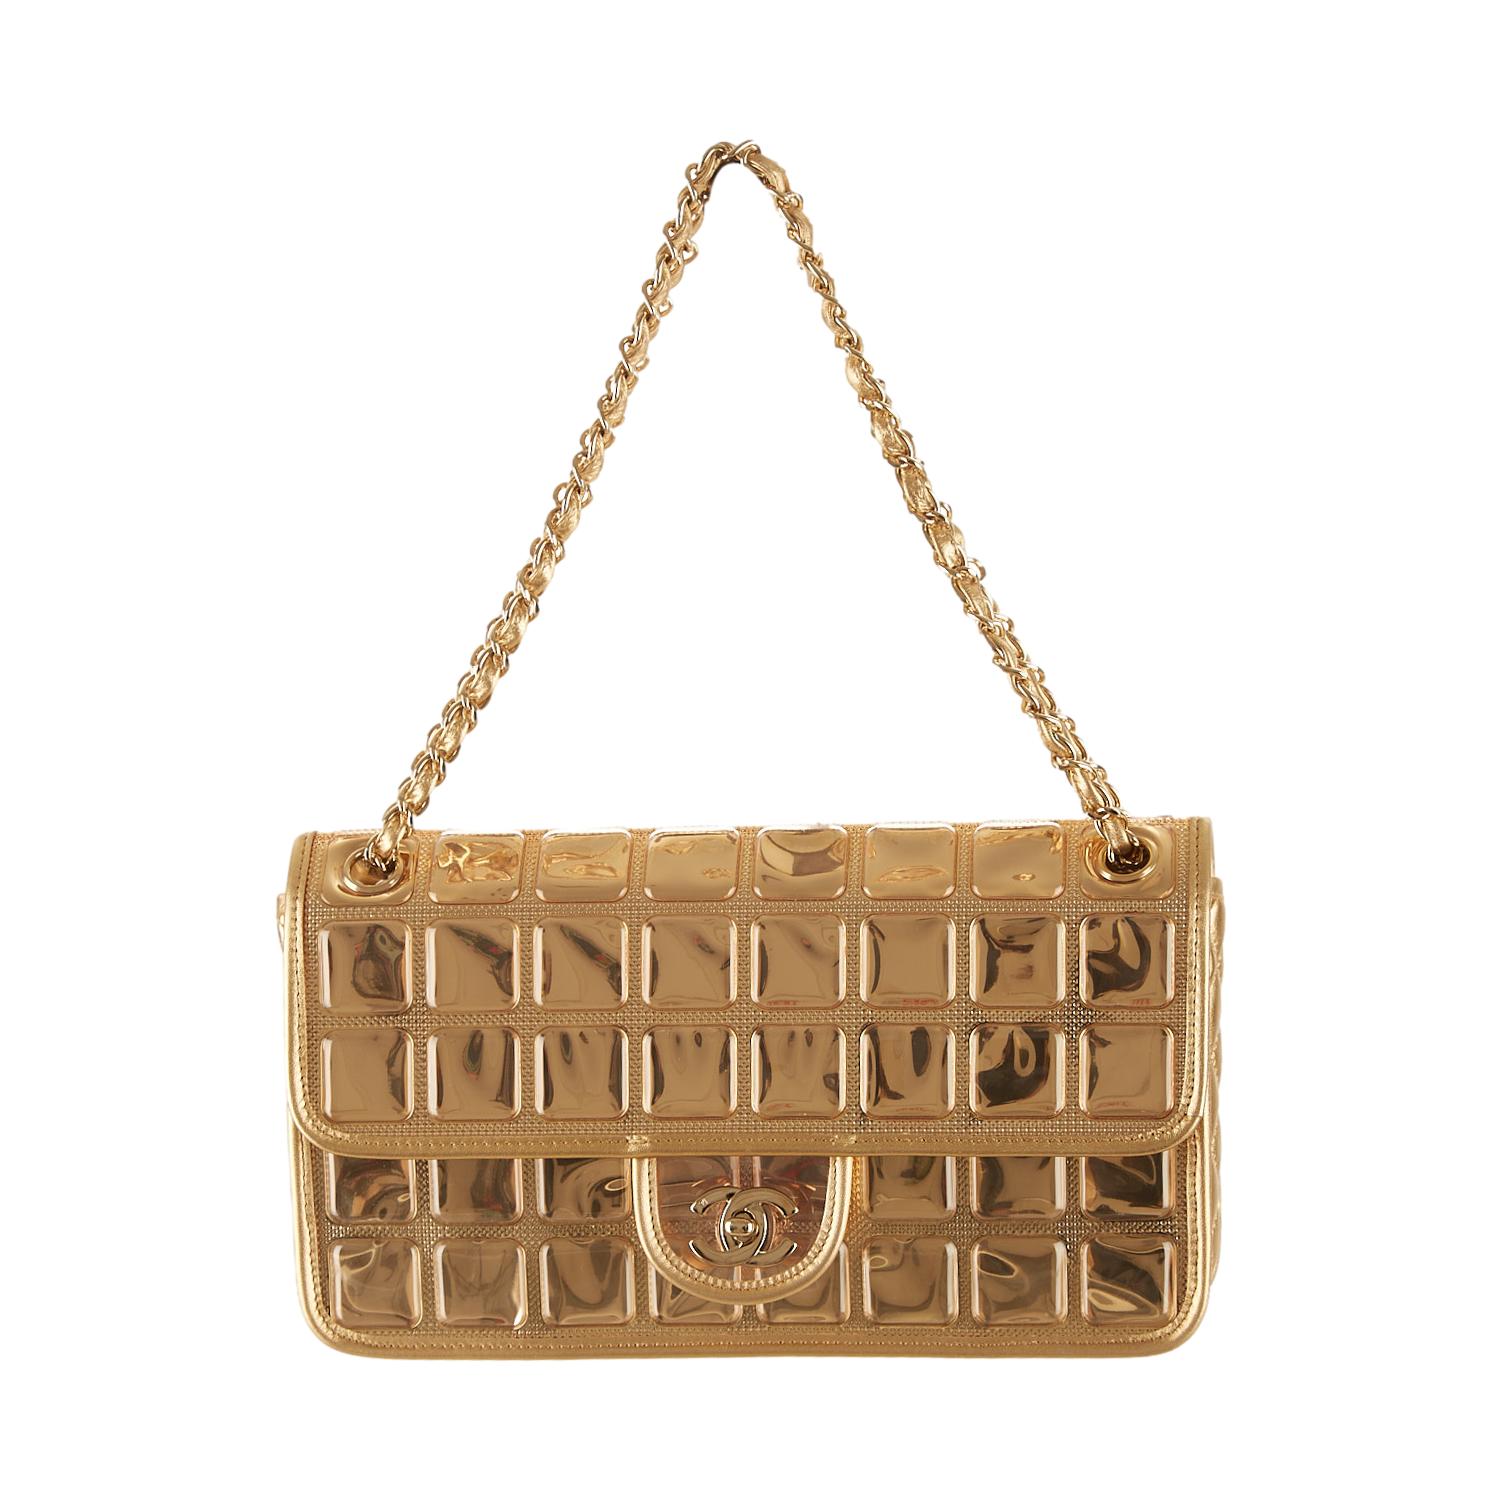 Chanel Gold Ice Cube Chain Flap Bag